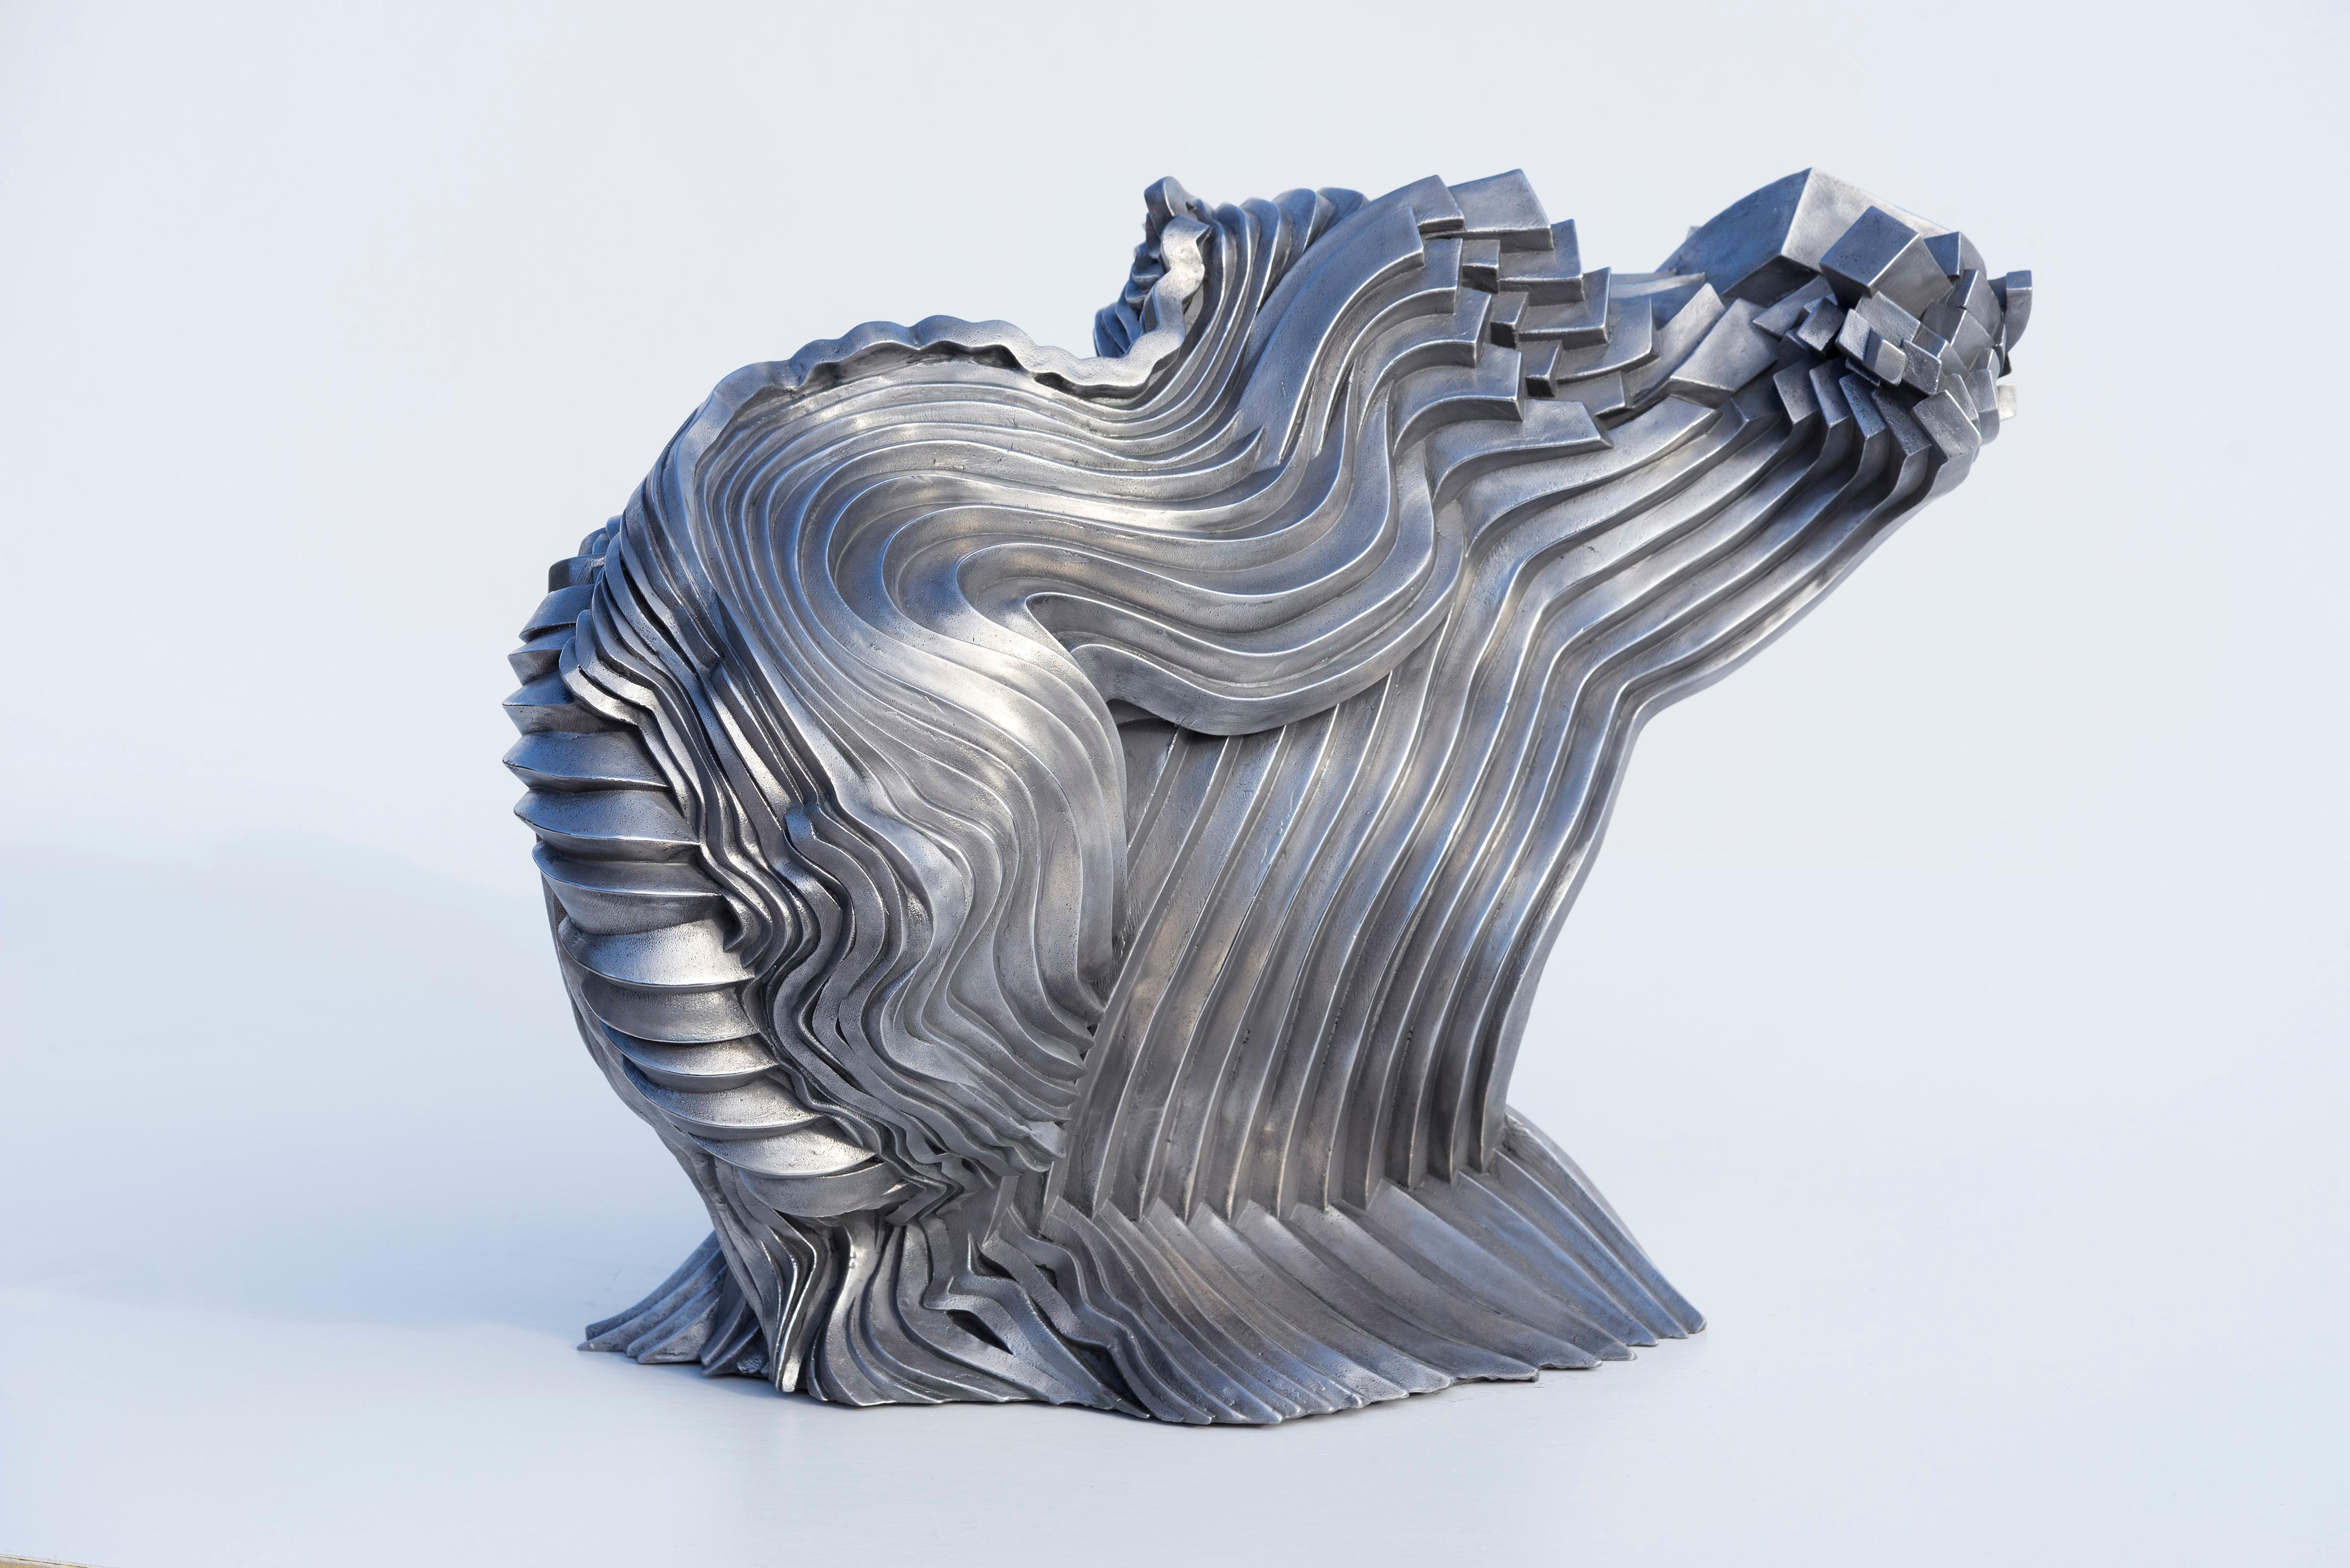 Stainless steel sculpture
Edition of 20